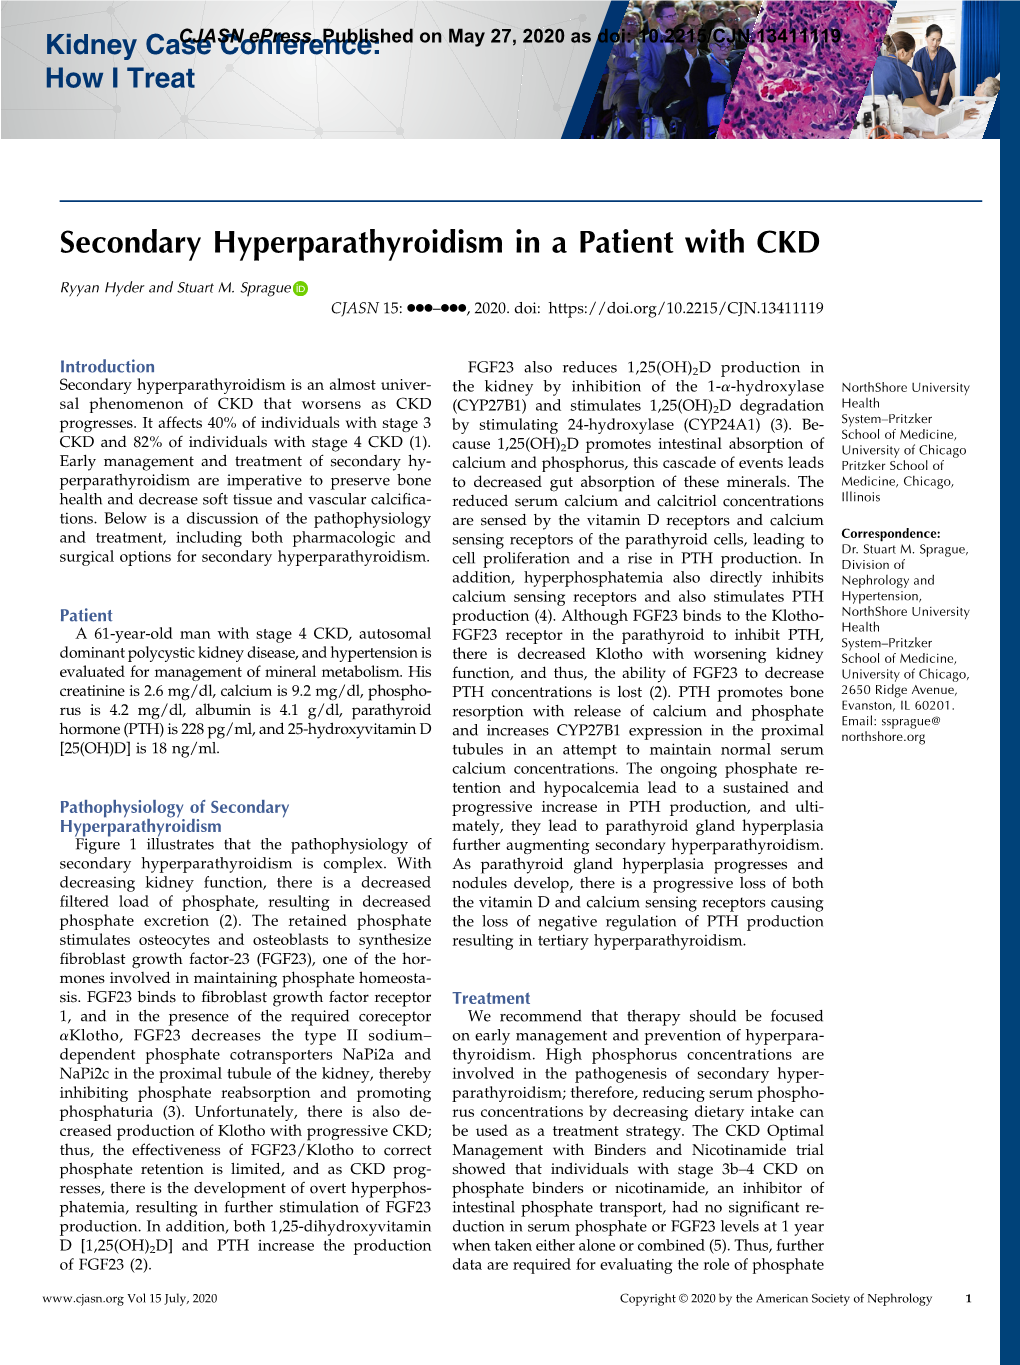 Secondary Hyperparathyroidism in a Patient with CKD